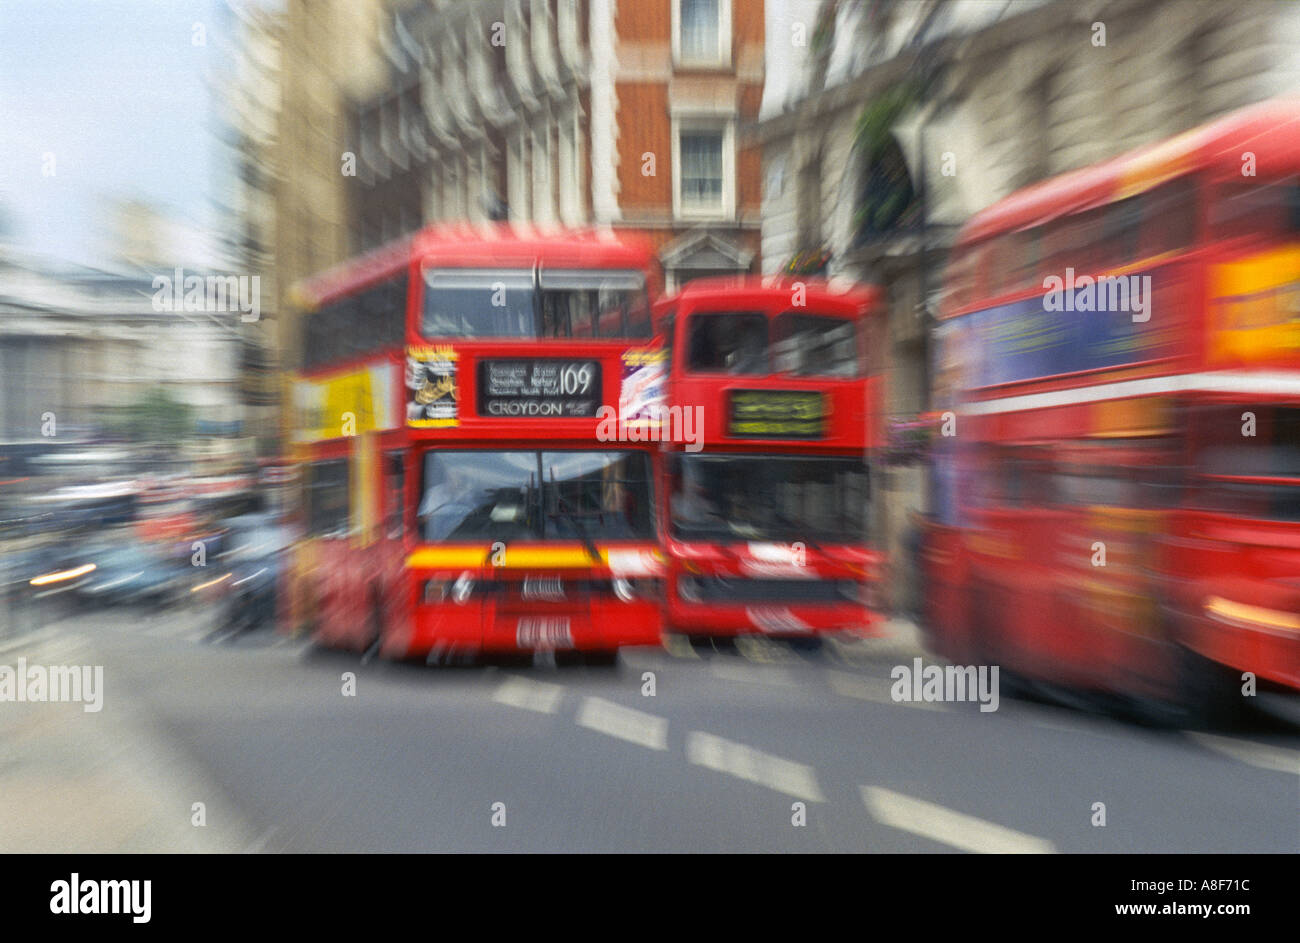 London red double-decker buses in Whitehall Stock Photo